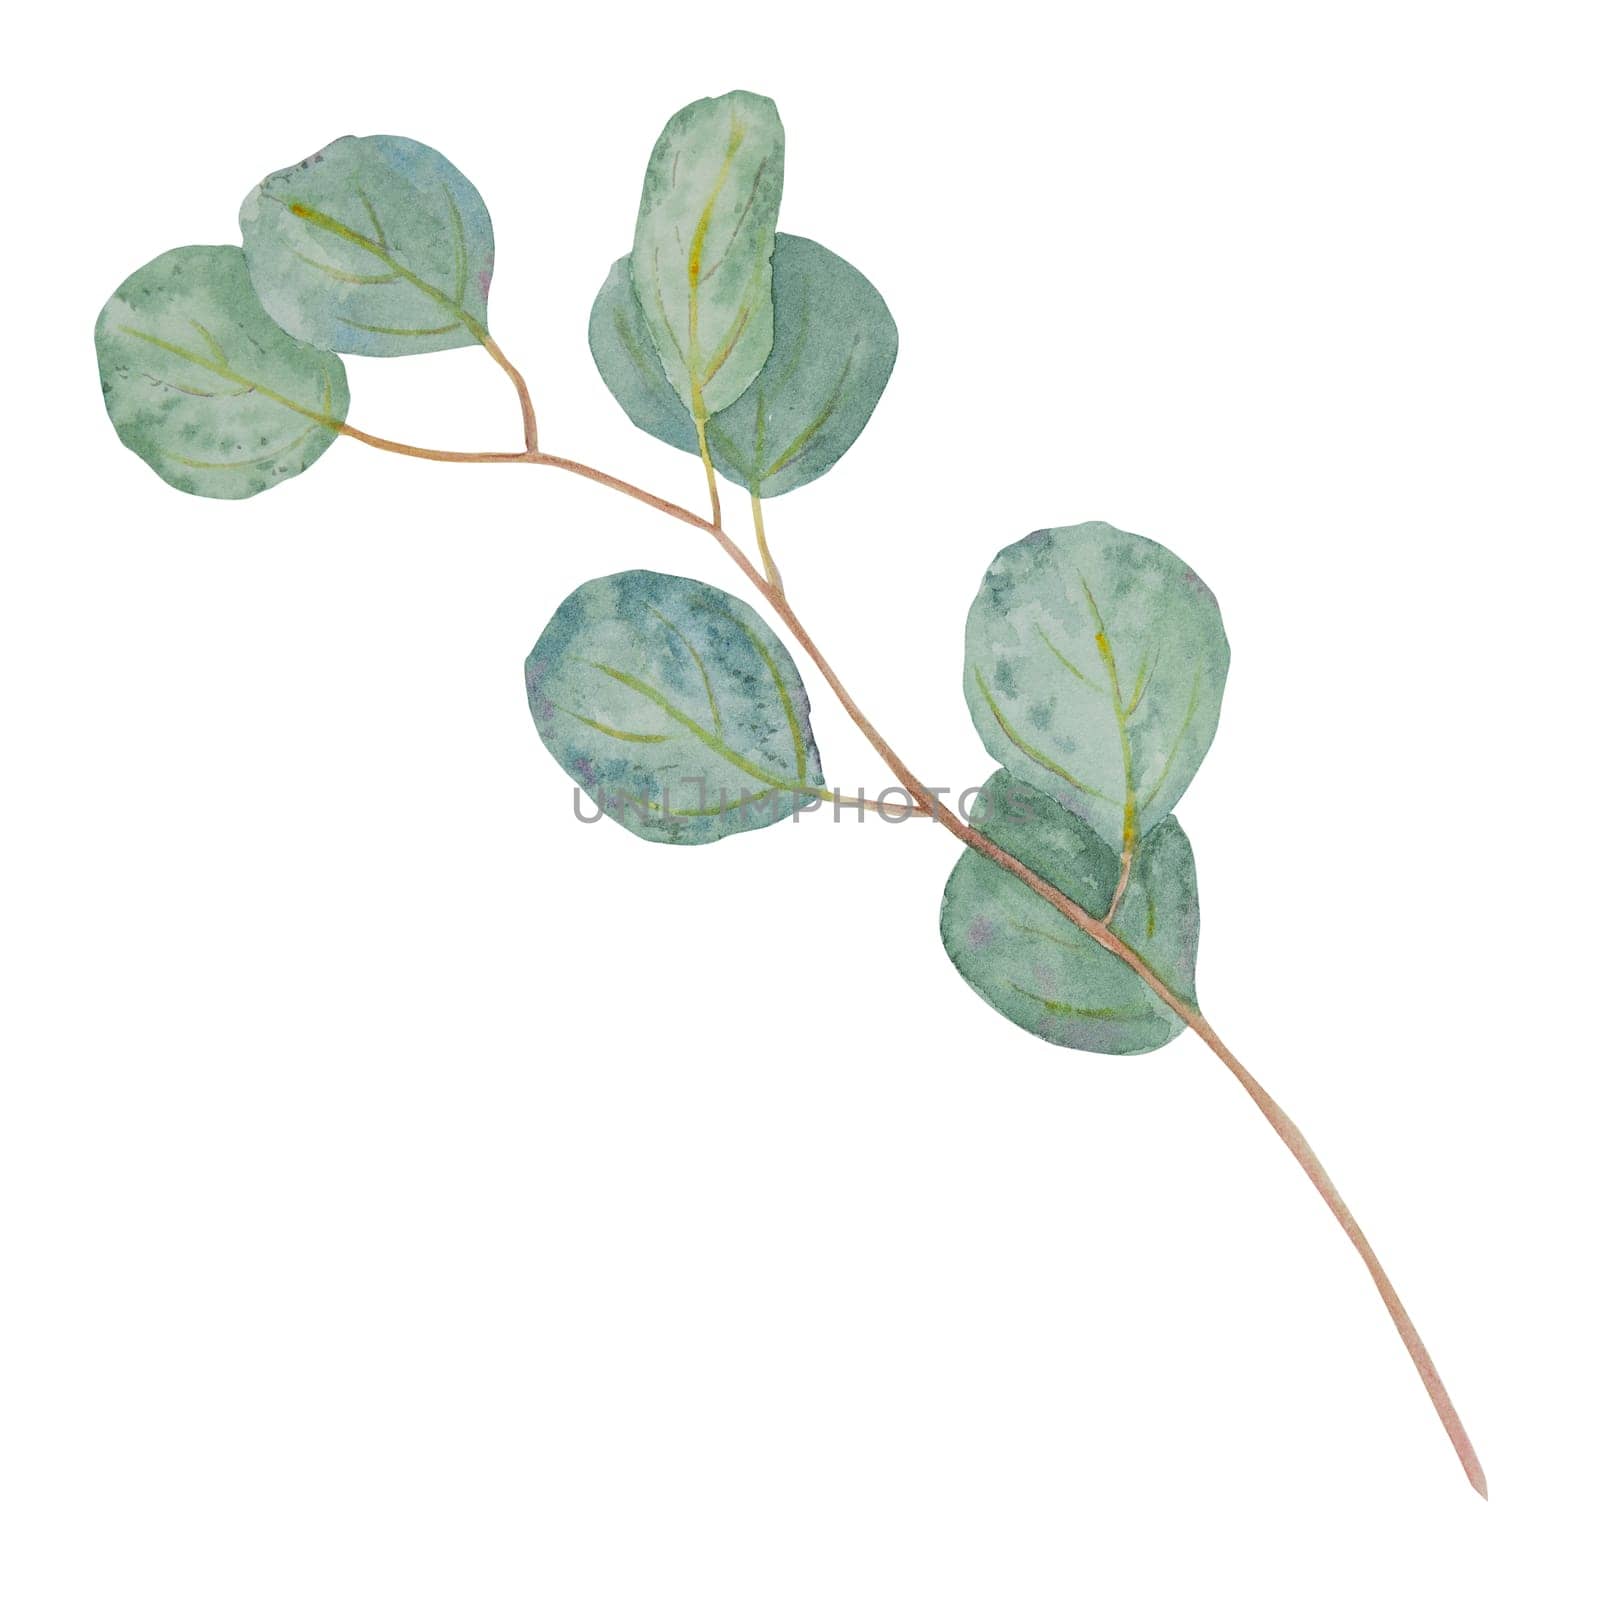 Eucalyptus branch watercolor hand drawn floral illustration. Botanical painting of greenery leaves are isolated. Good as an element in the decorative design of invitation, wedding, greeting cards, textile. Tropical plant, tree branch on the white background. Eucalyptus populus.